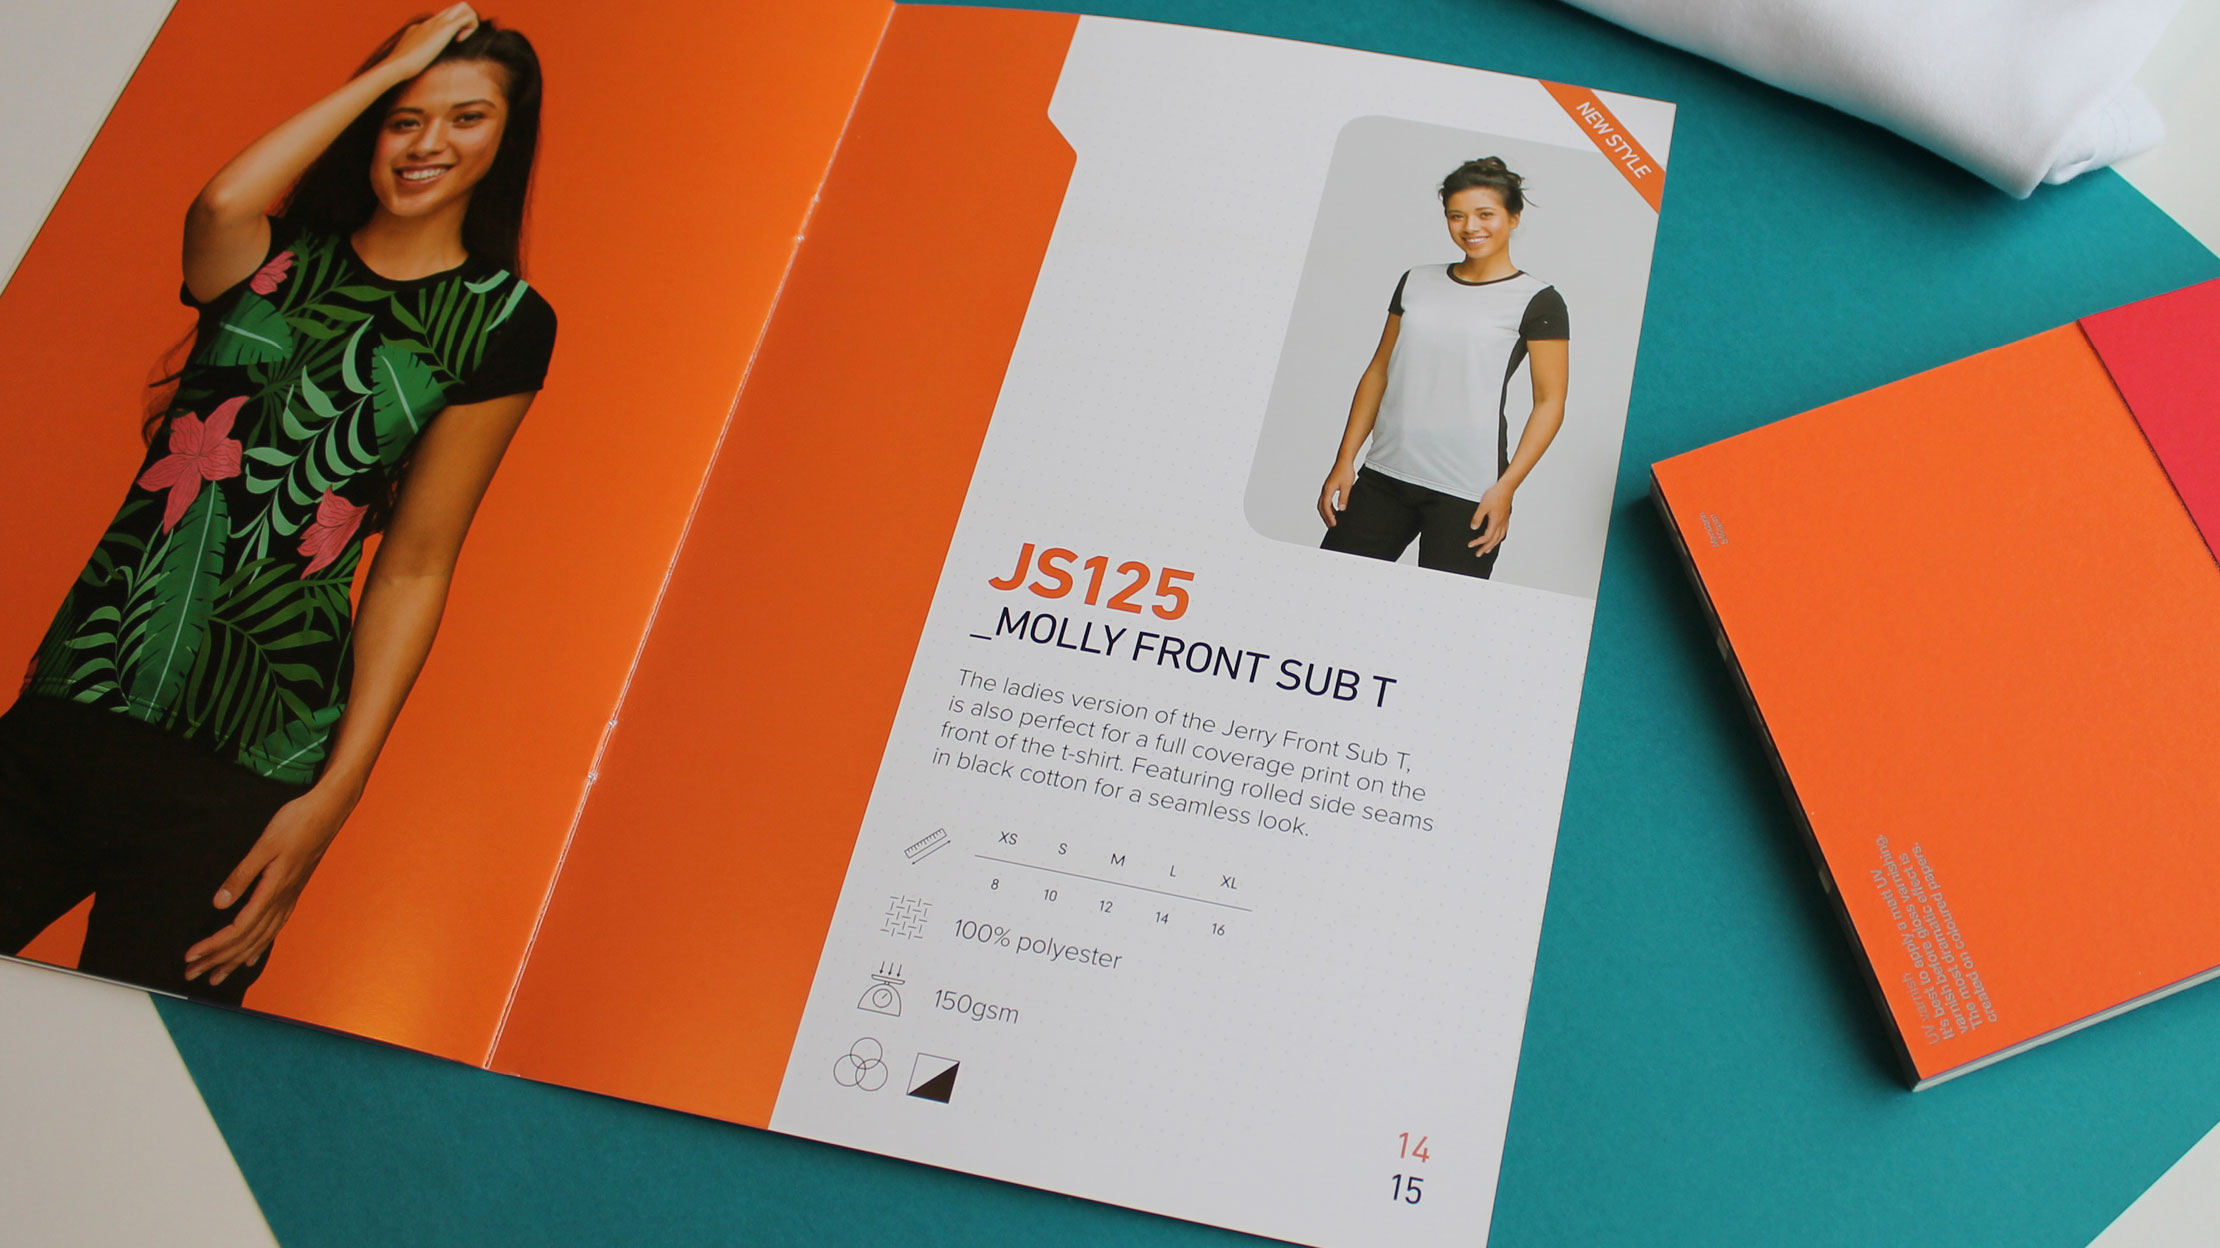 Brochure spread with a model posing on the left page.